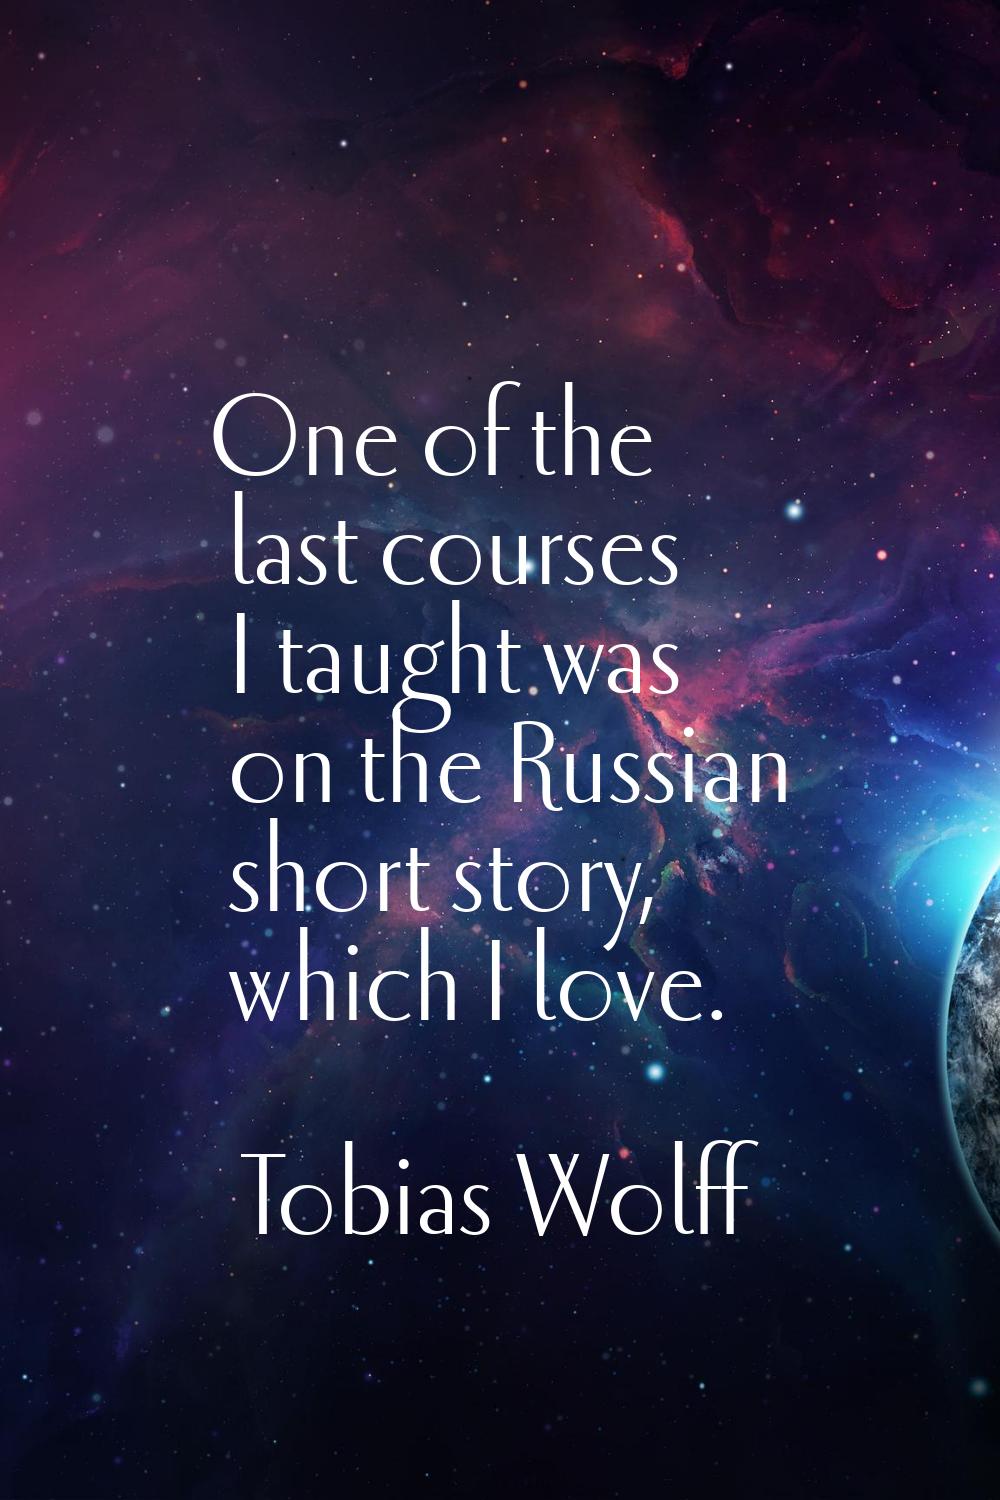 One of the last courses I taught was on the Russian short story, which I love.